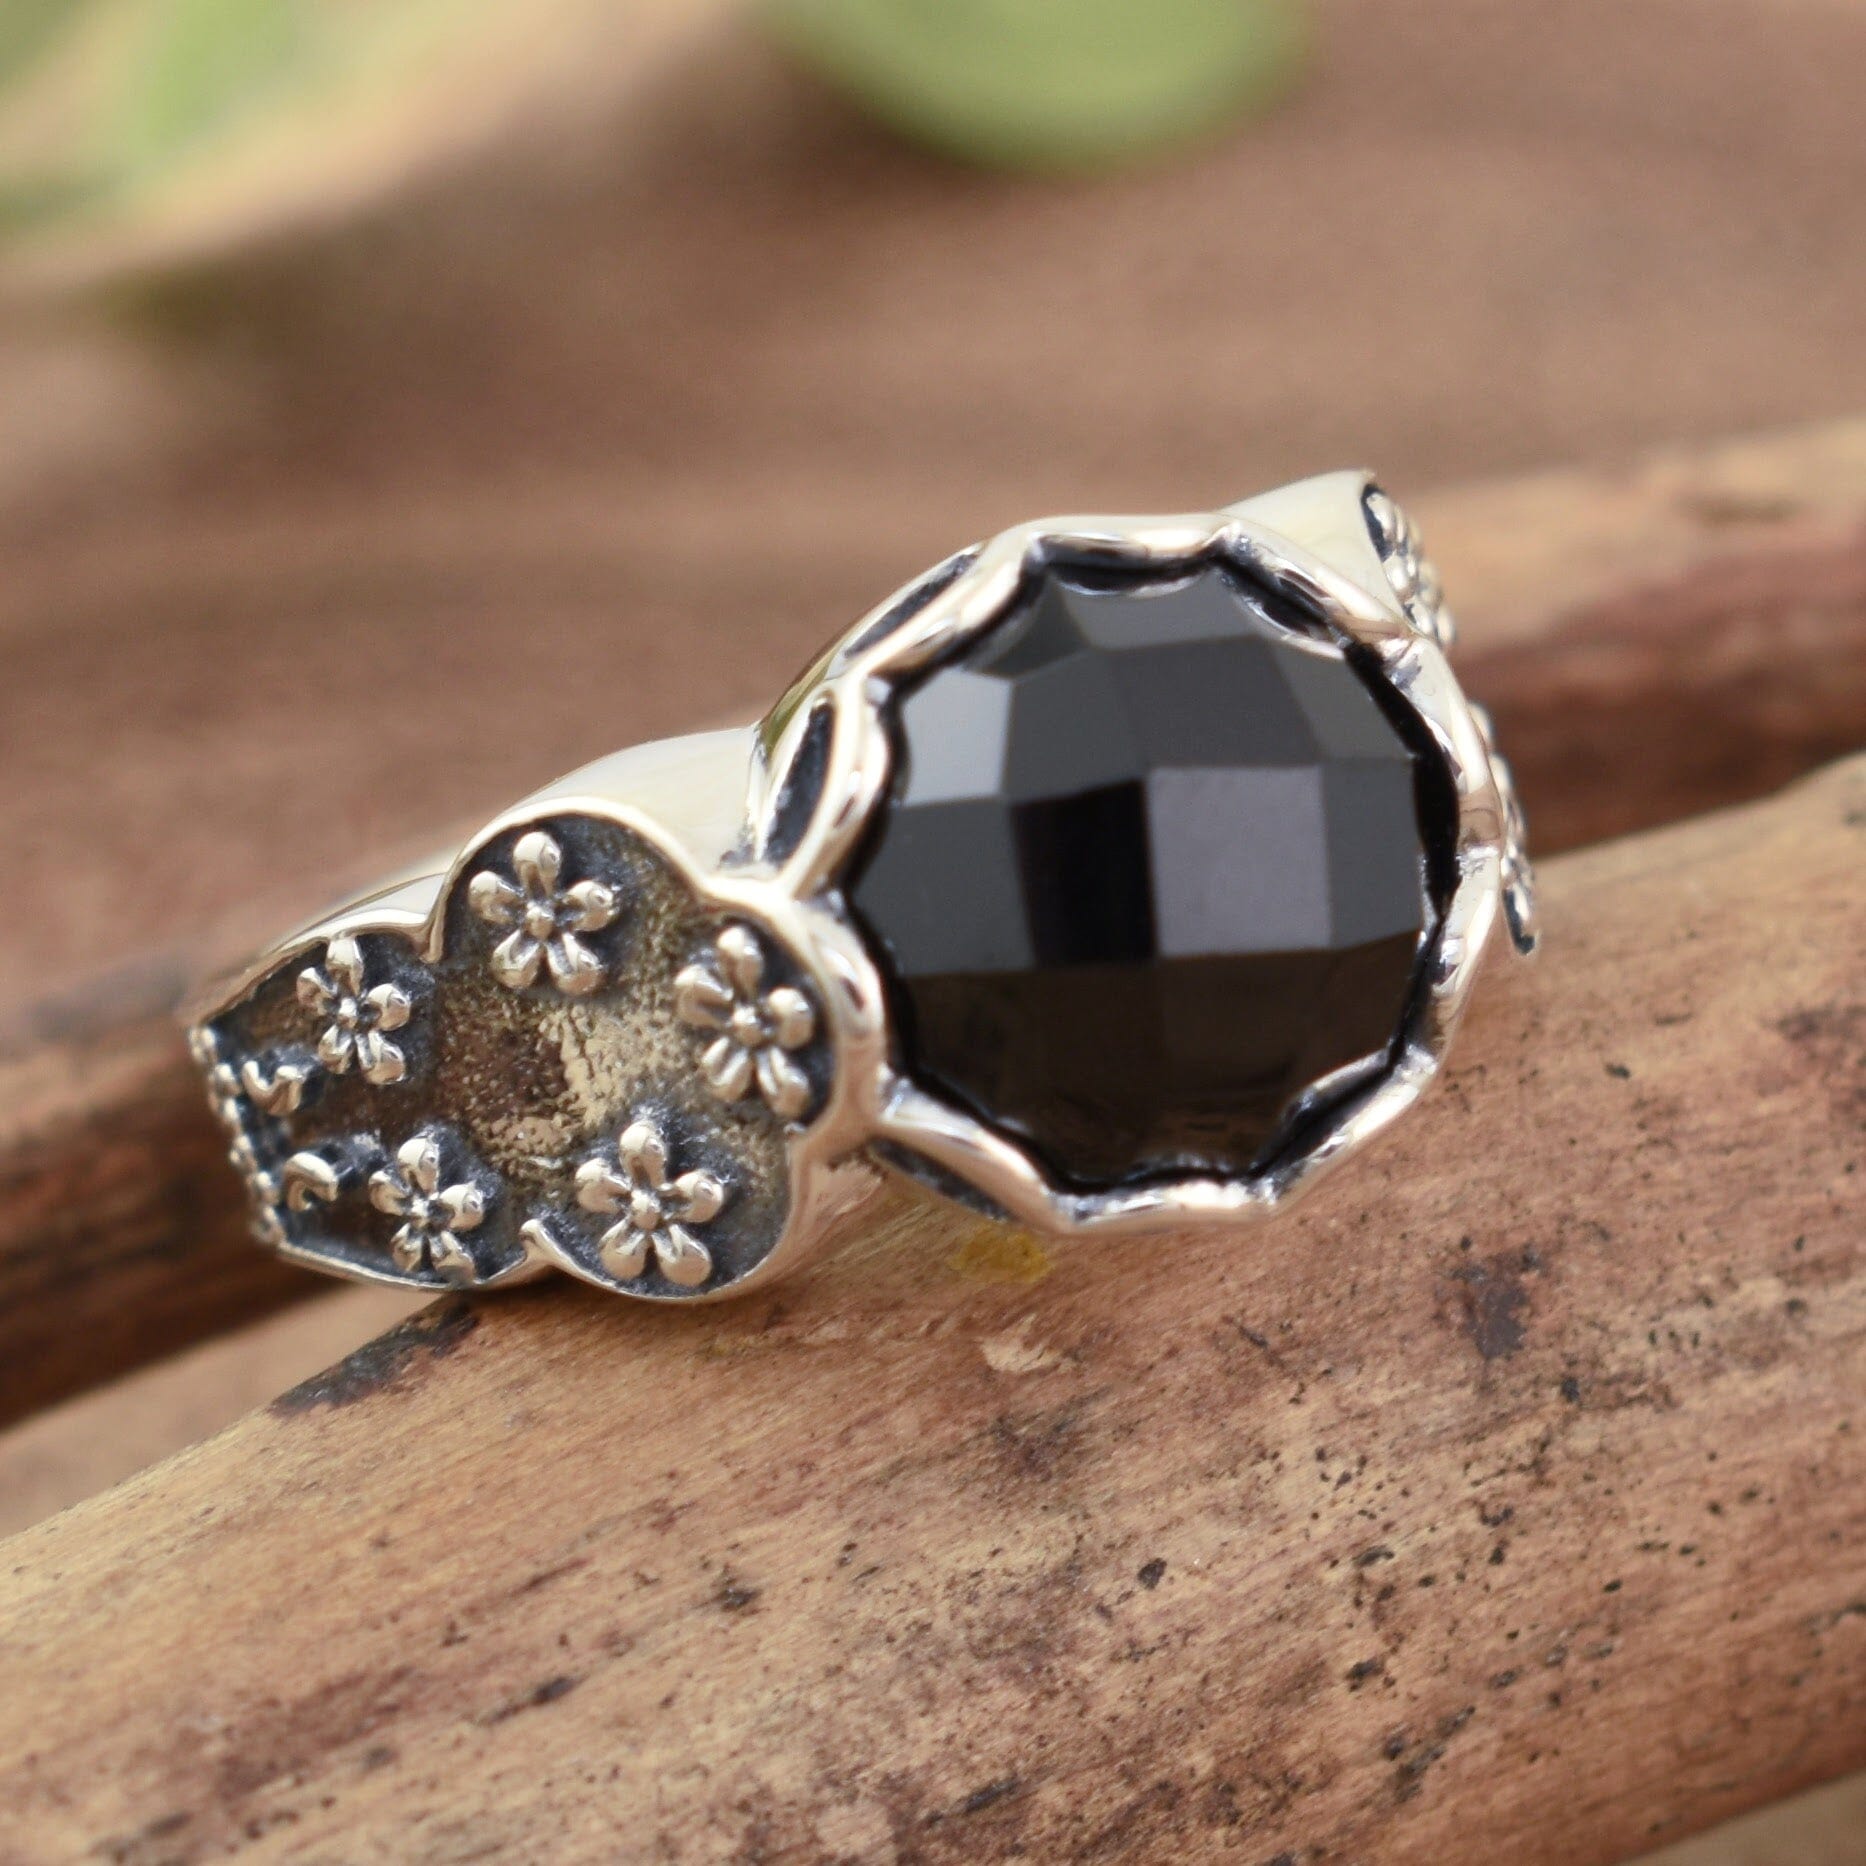 antique floral ring featuring black spinel - Miss Molly